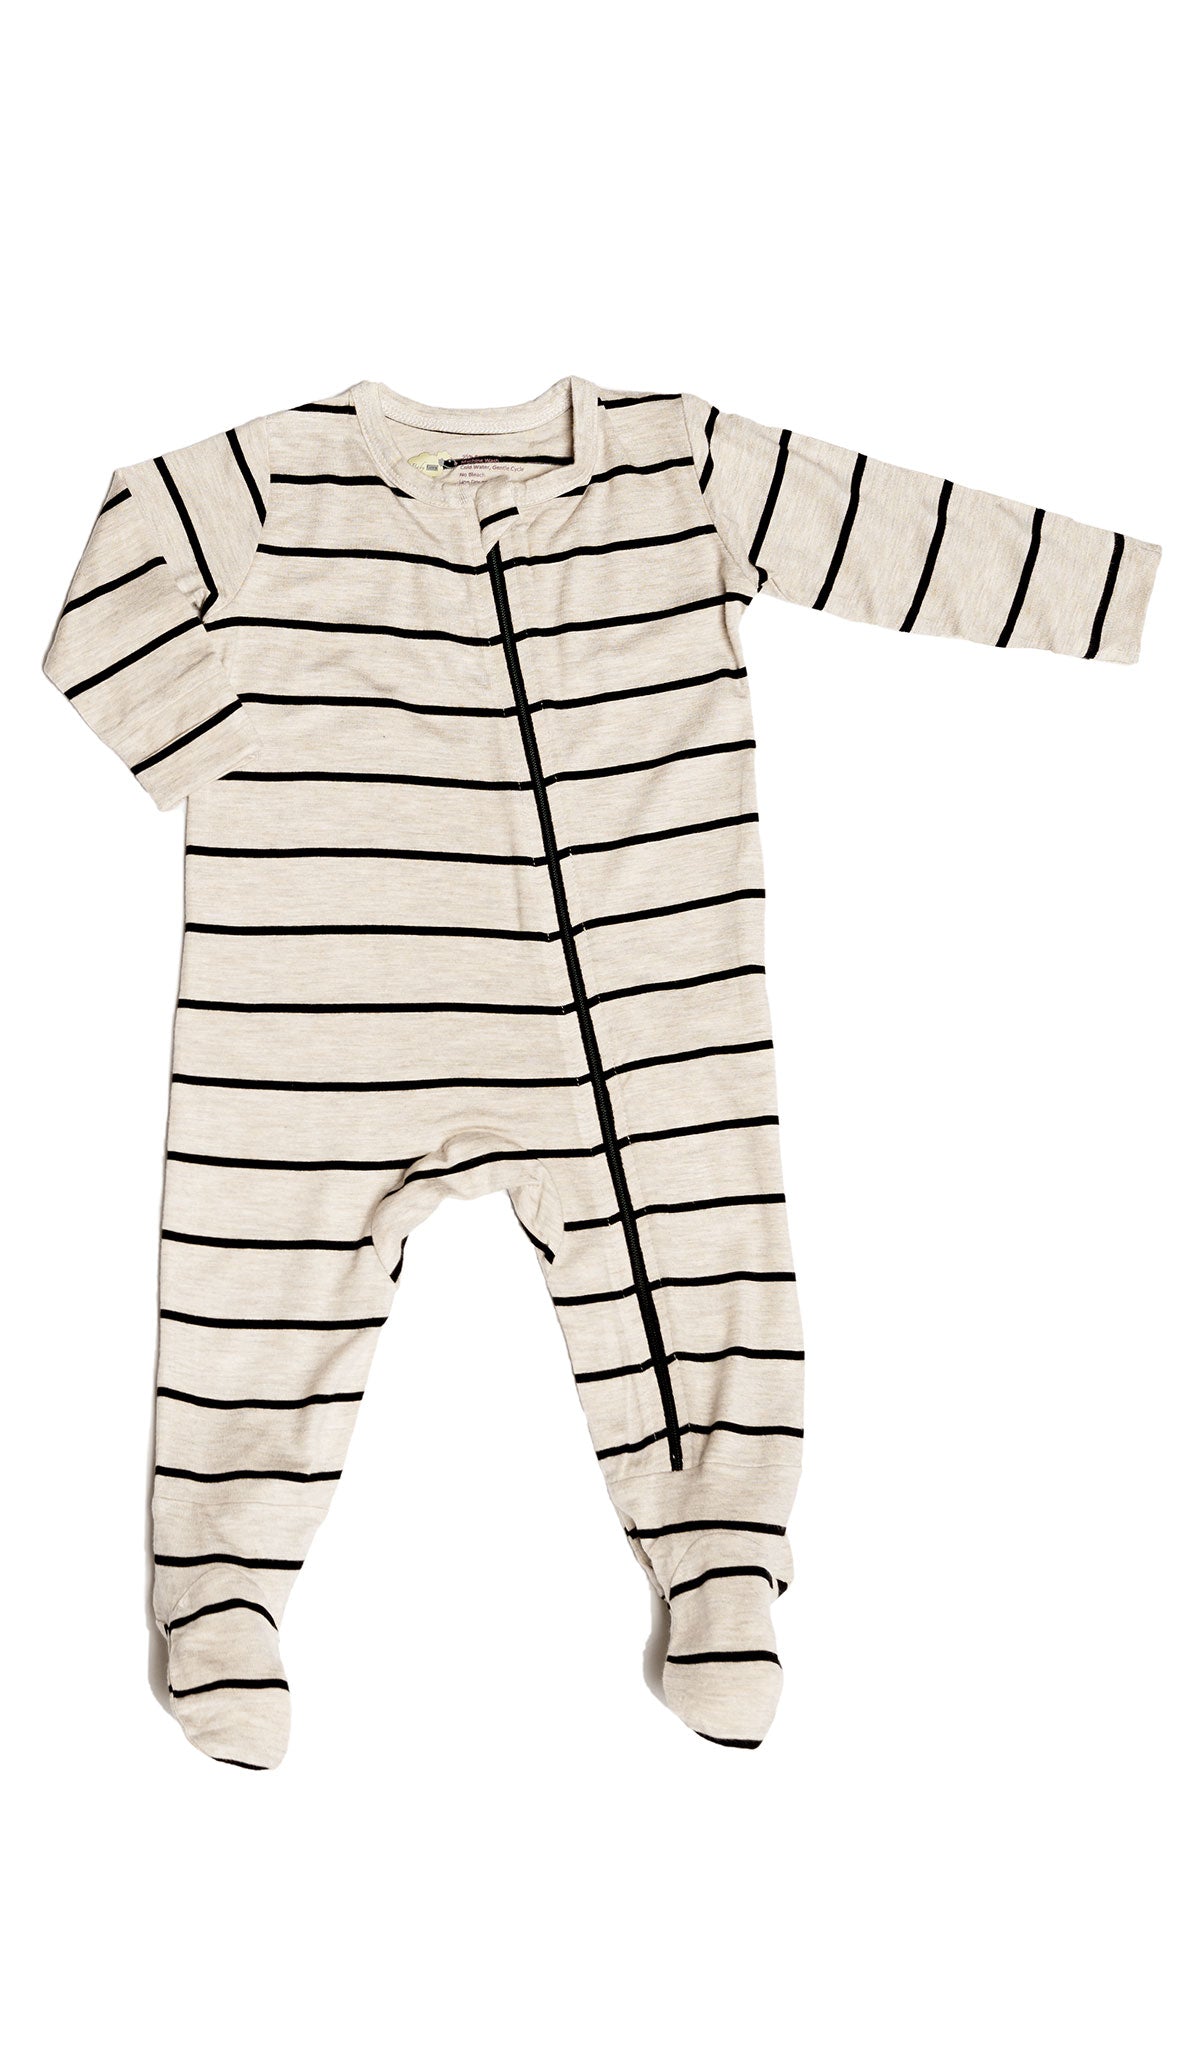 Sand Stripe Footie with long sleeves and zip front.